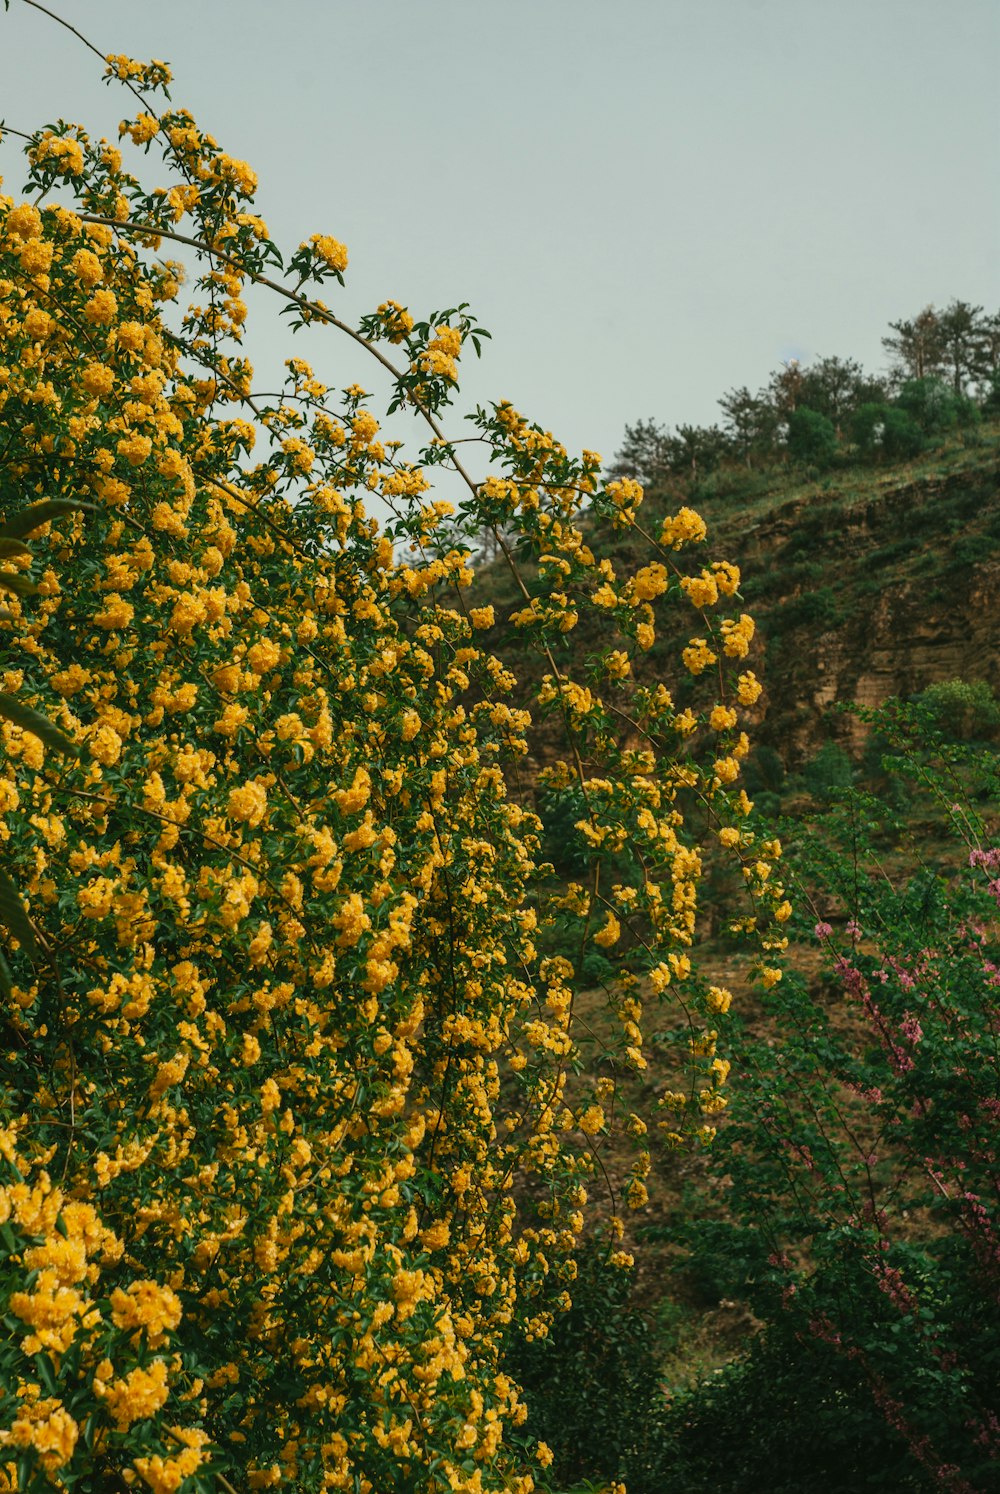 a bush with yellow flowers on it next to a hill